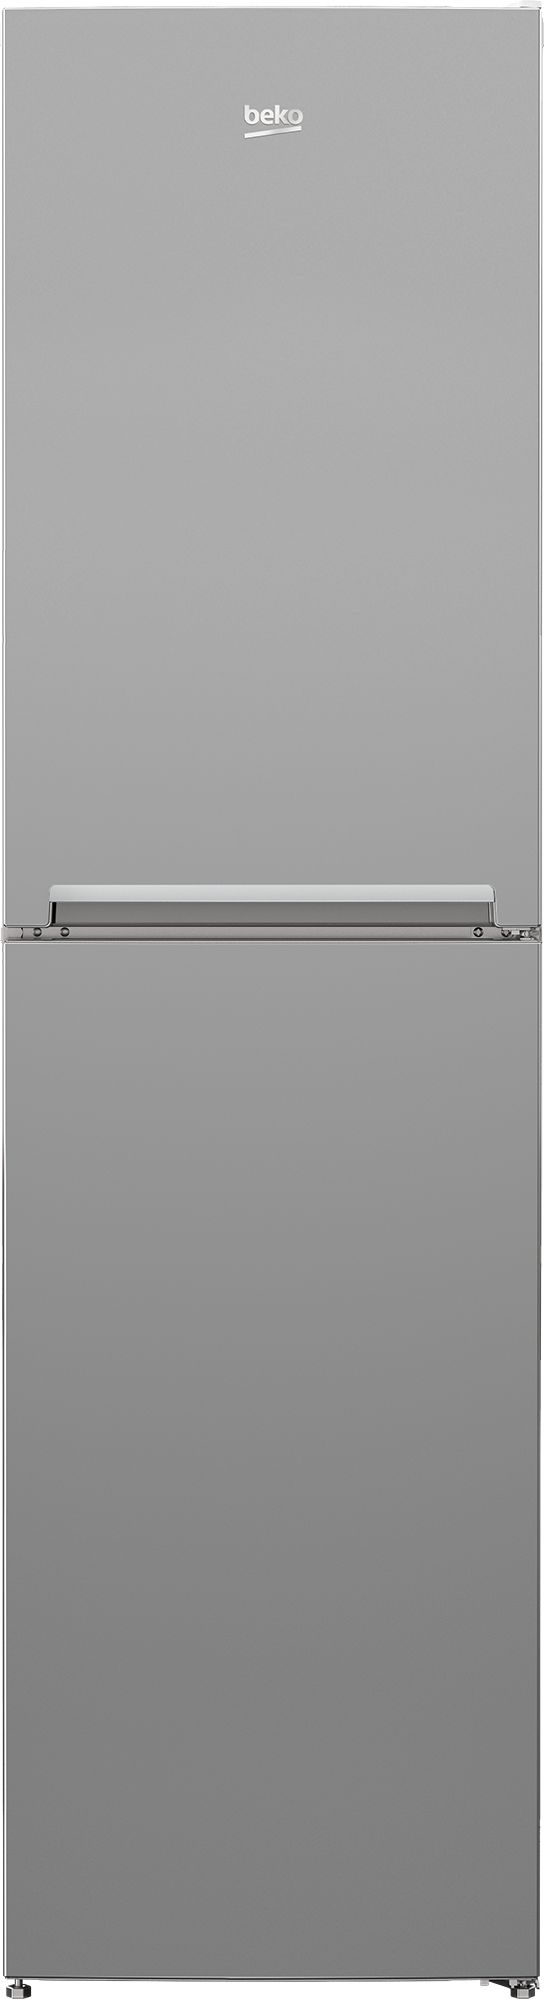 Beko CFG4501S 40/60 Frost Free Fridge Freezer - Silver - E Rated, Silver